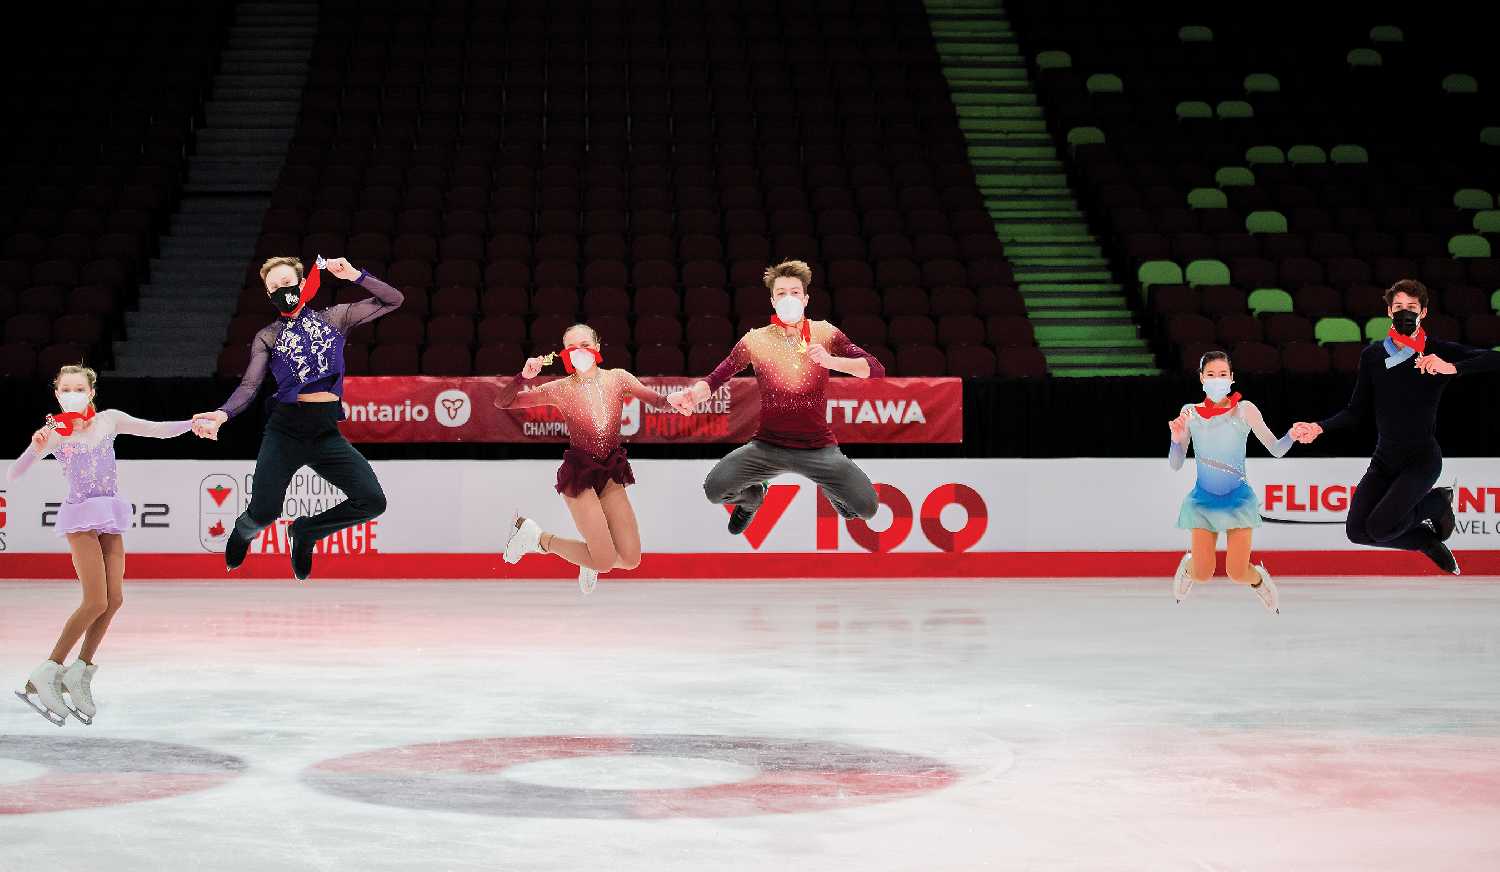 Marty Haubrich and Summer Homick, at far left, jumping to celebrate their silver medals in Junior Pairs at Skate Canada Nationals, along with the first and third place winners.